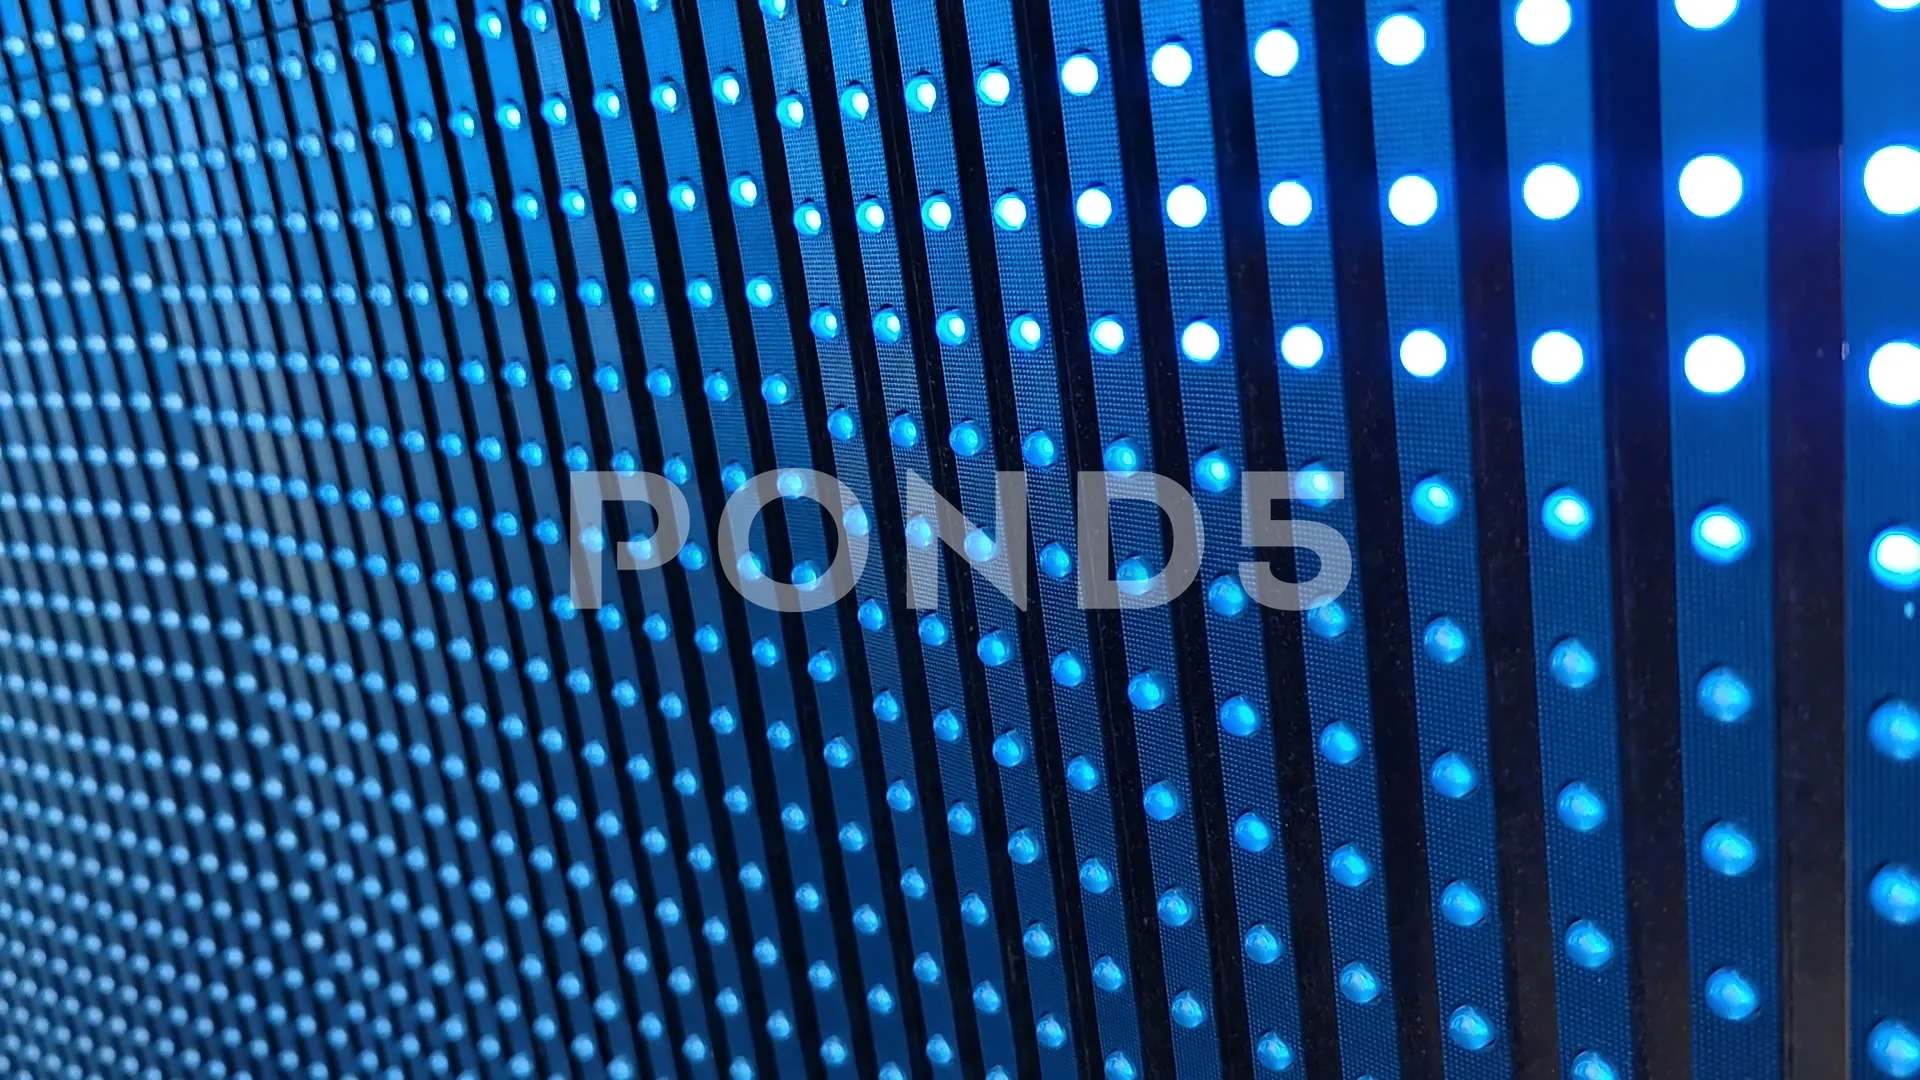 3D Animation Led Screen Stock Footage ~ Royalty Free Stock Videos | Pond5